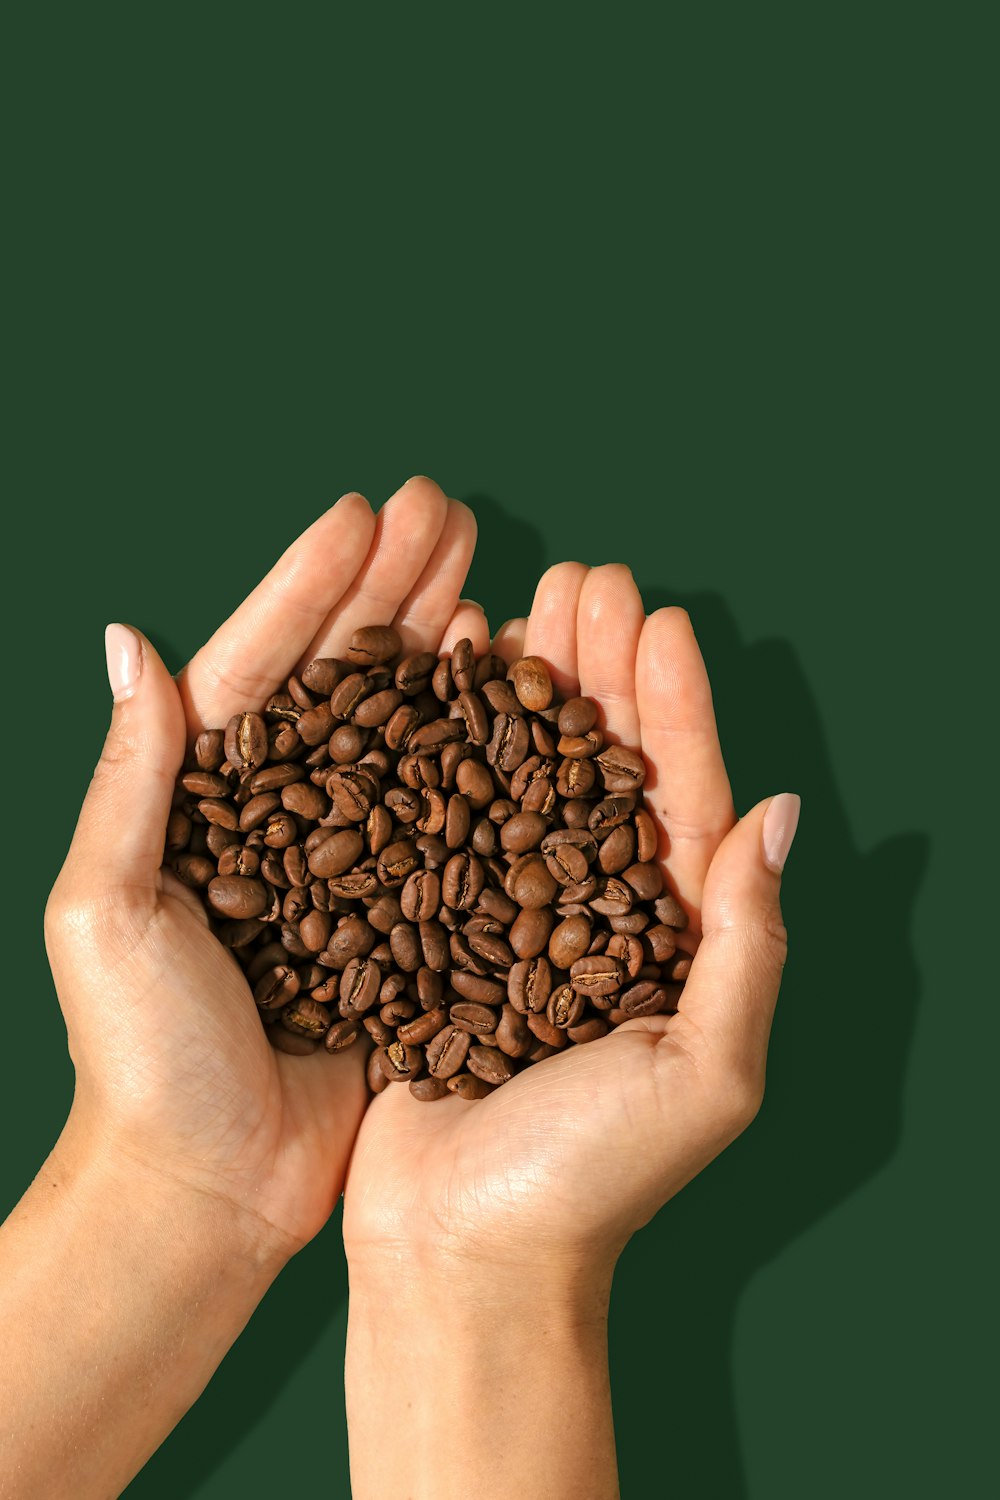 two hands holding a pile of coffee beans